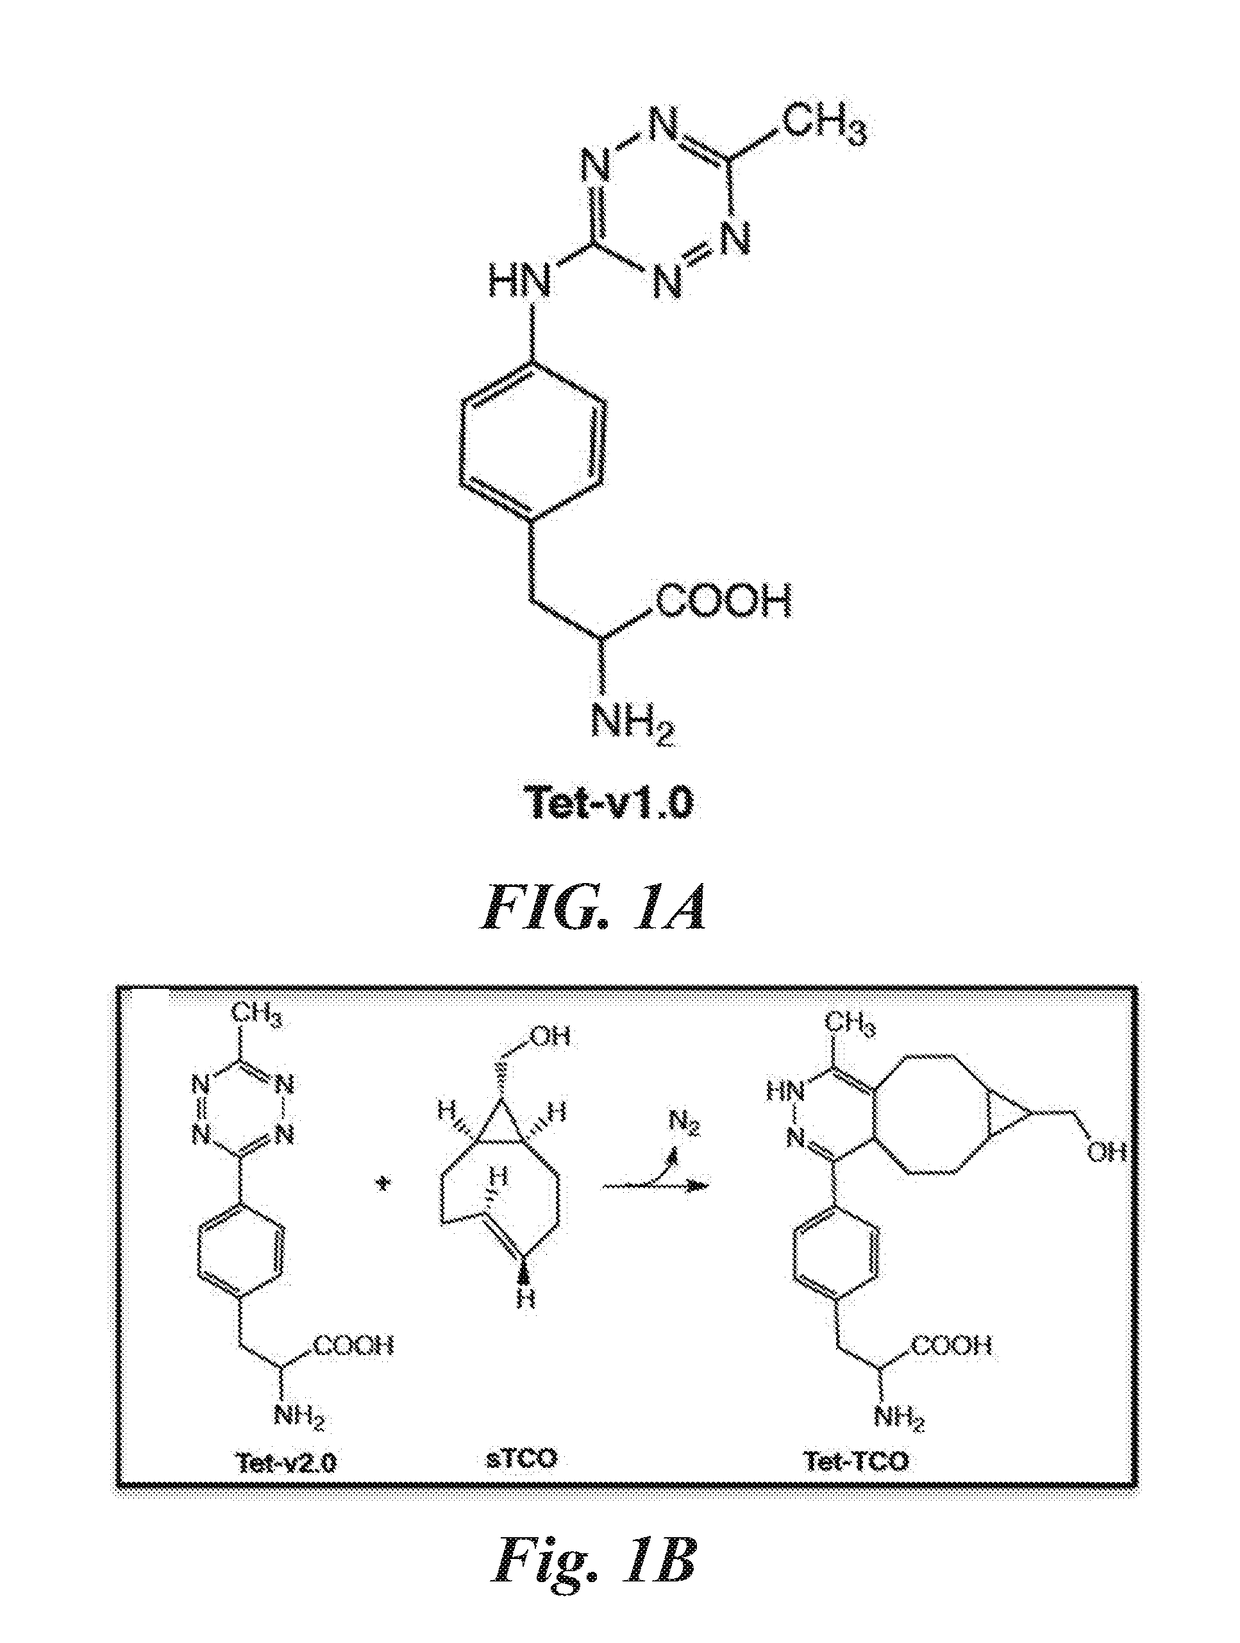 Reagents and methods for bioorthogonal labeling of biomolecules in living cells